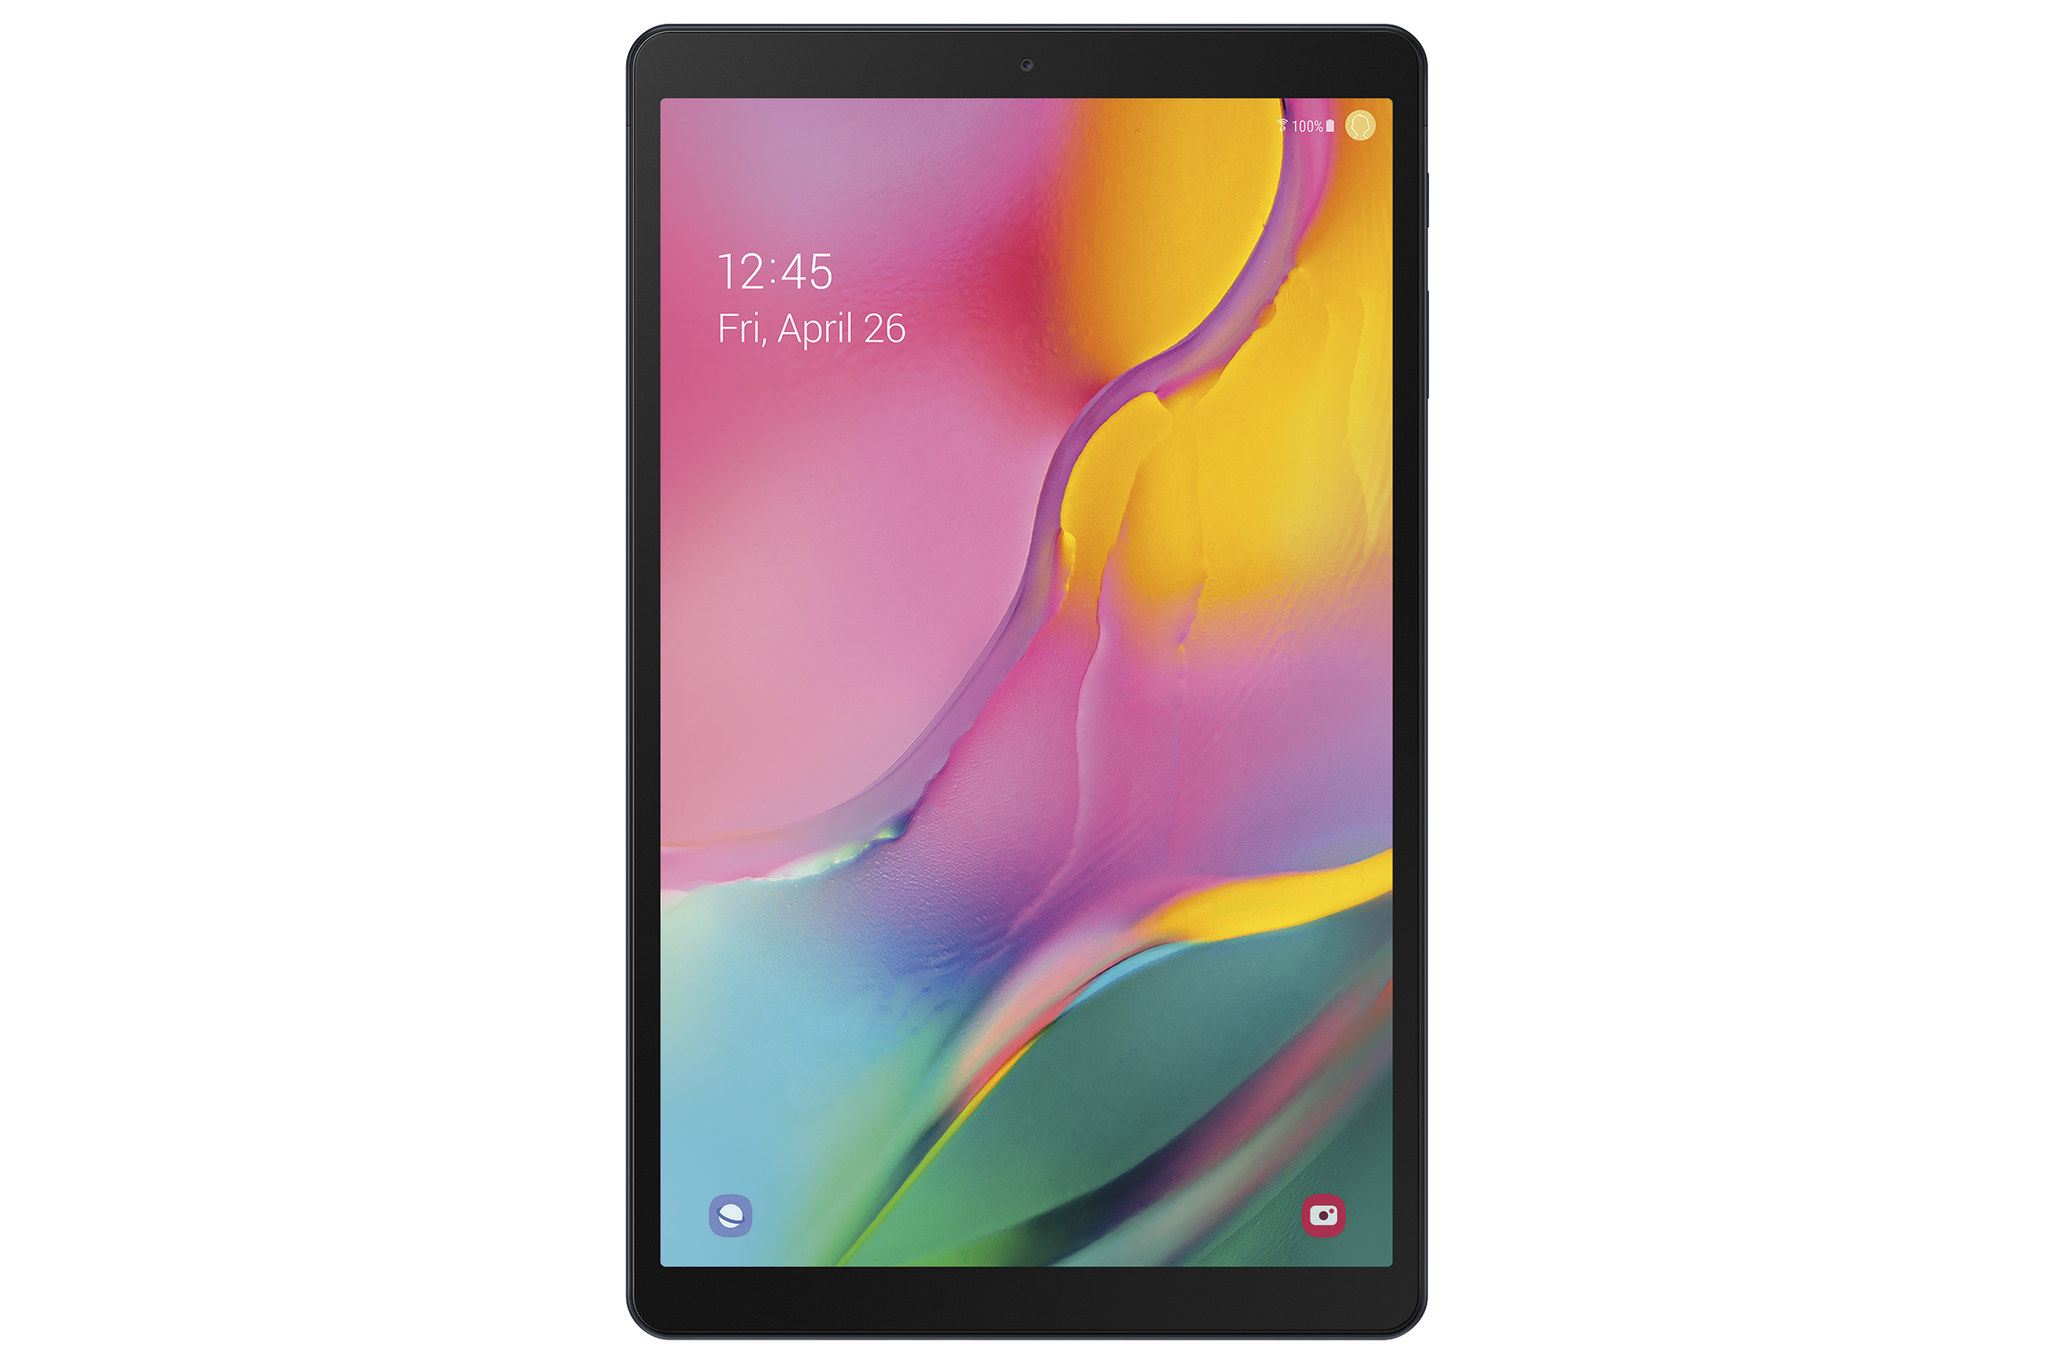 The tablet with a colorful abstract pattern on the screen